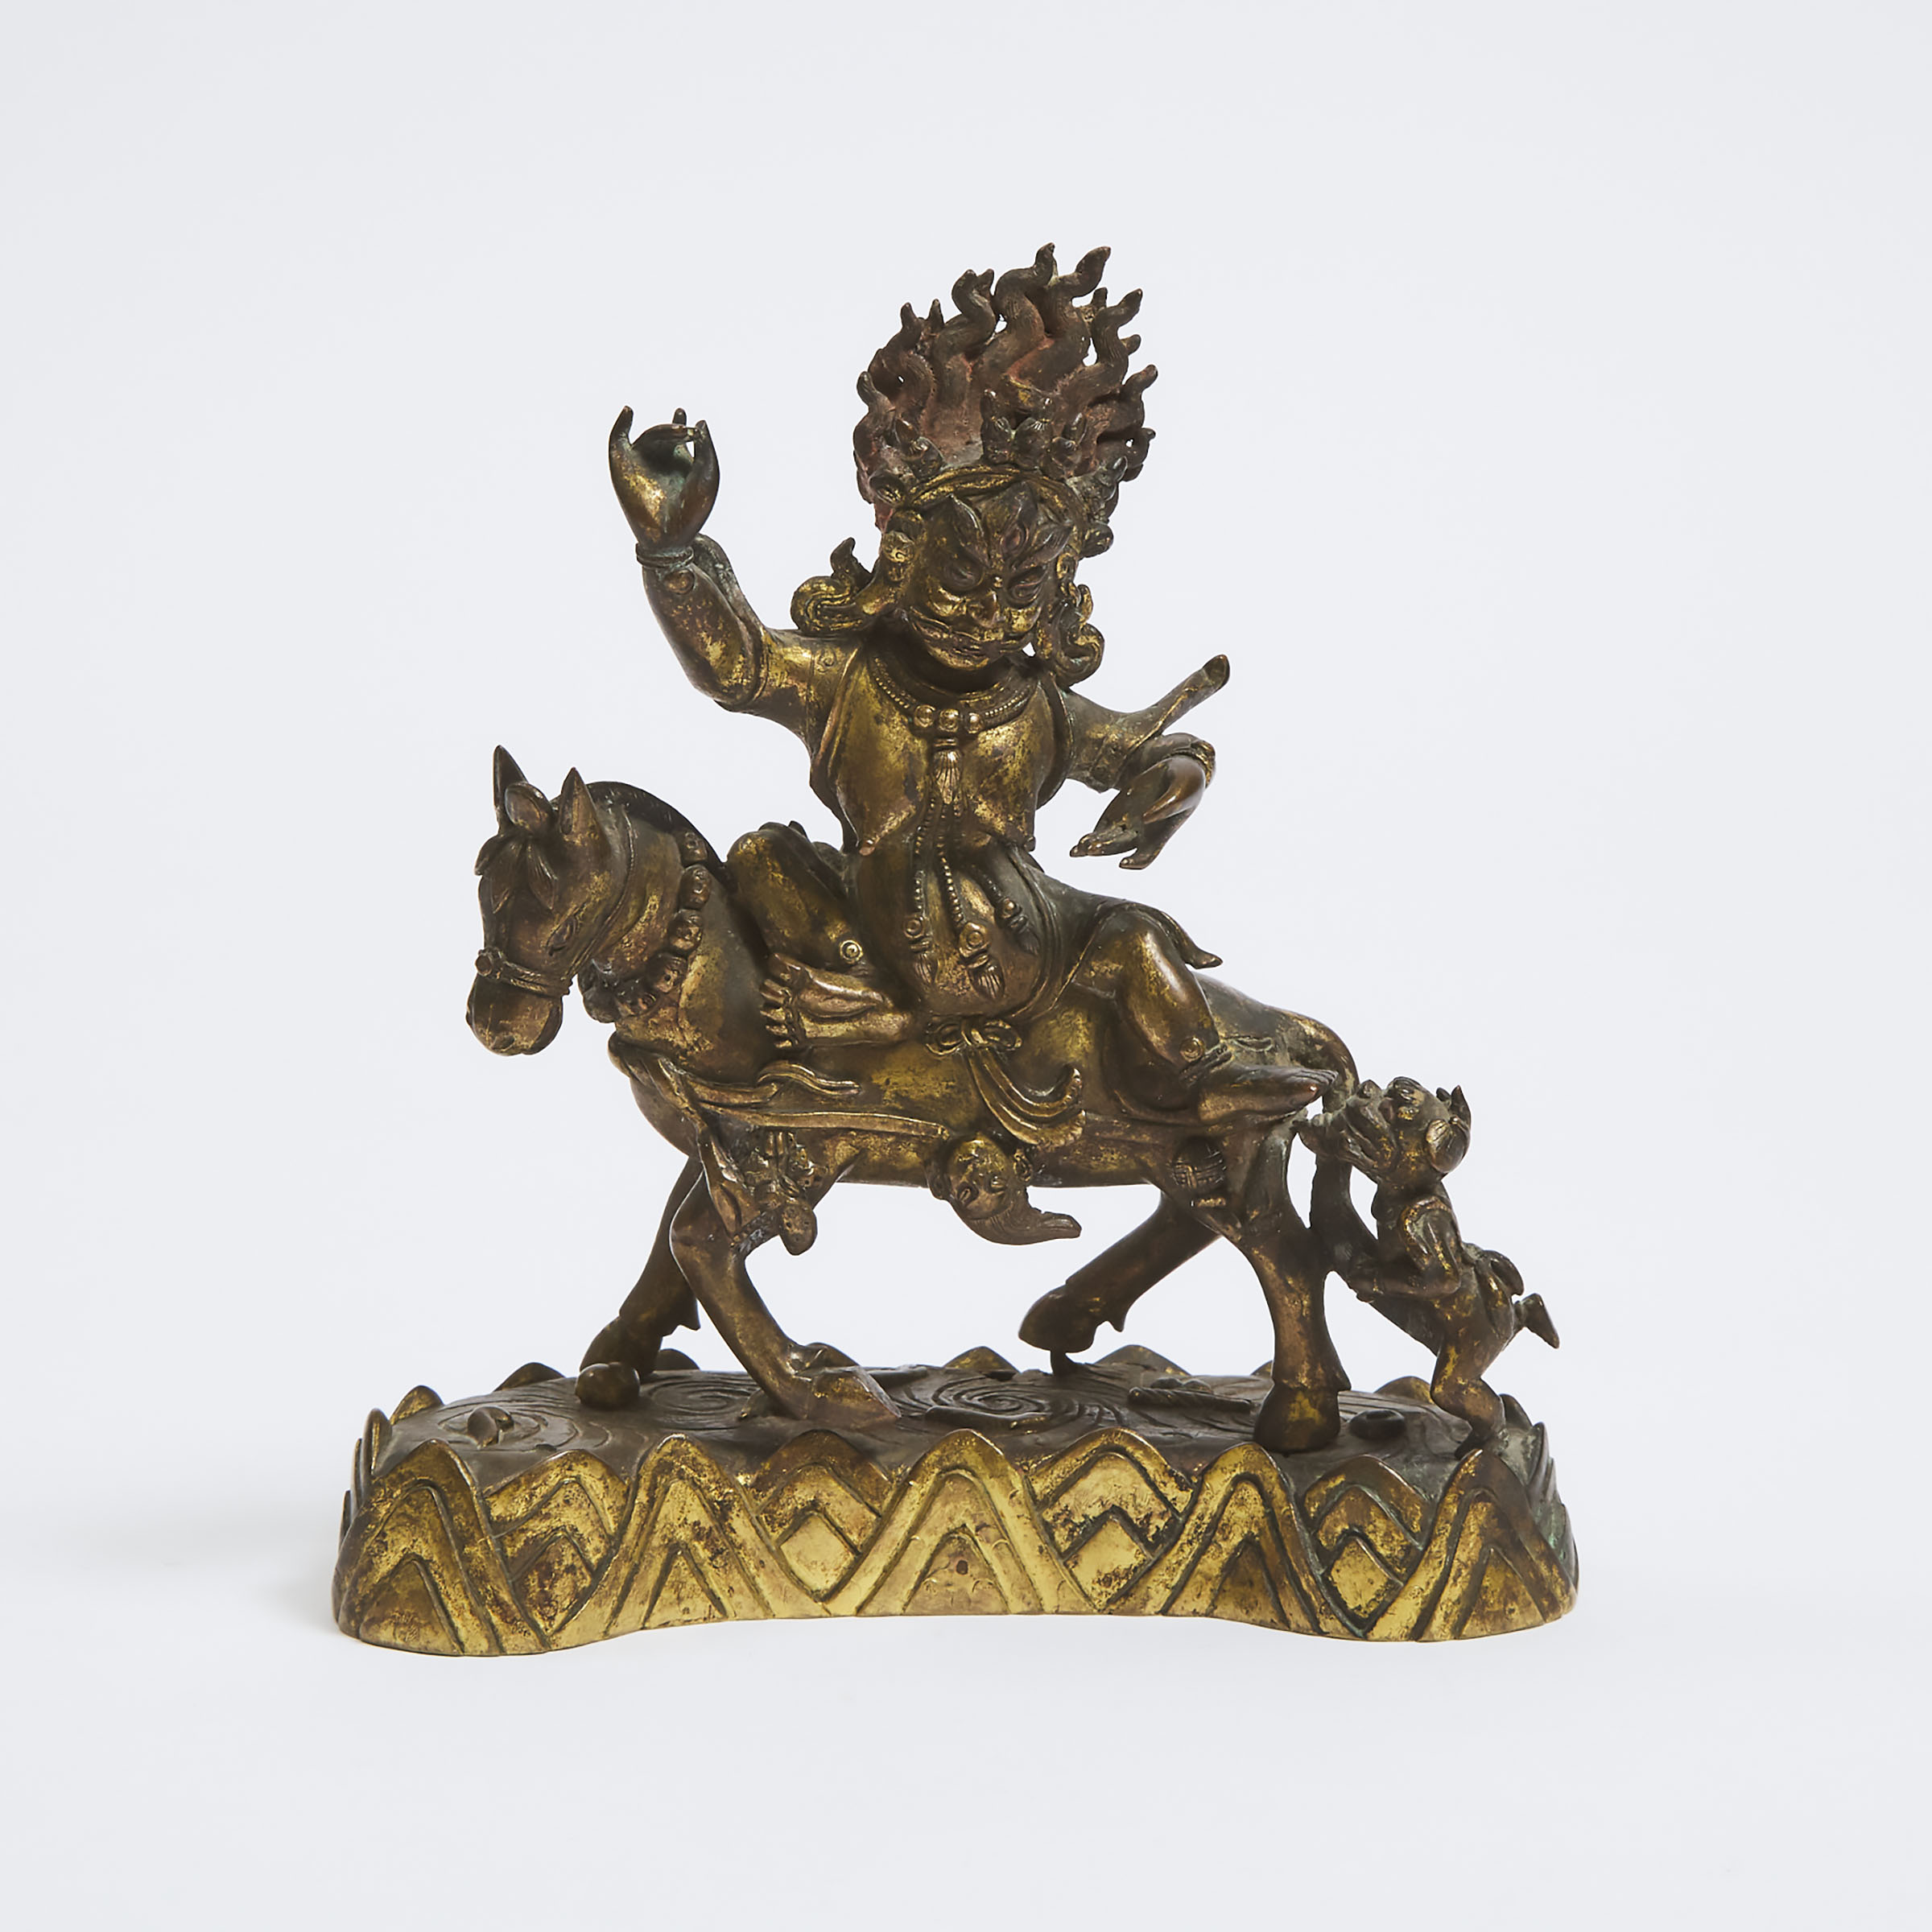 A Gilt Bronze Figure of Palden Lhamo with Simhavaktra, 18th Century